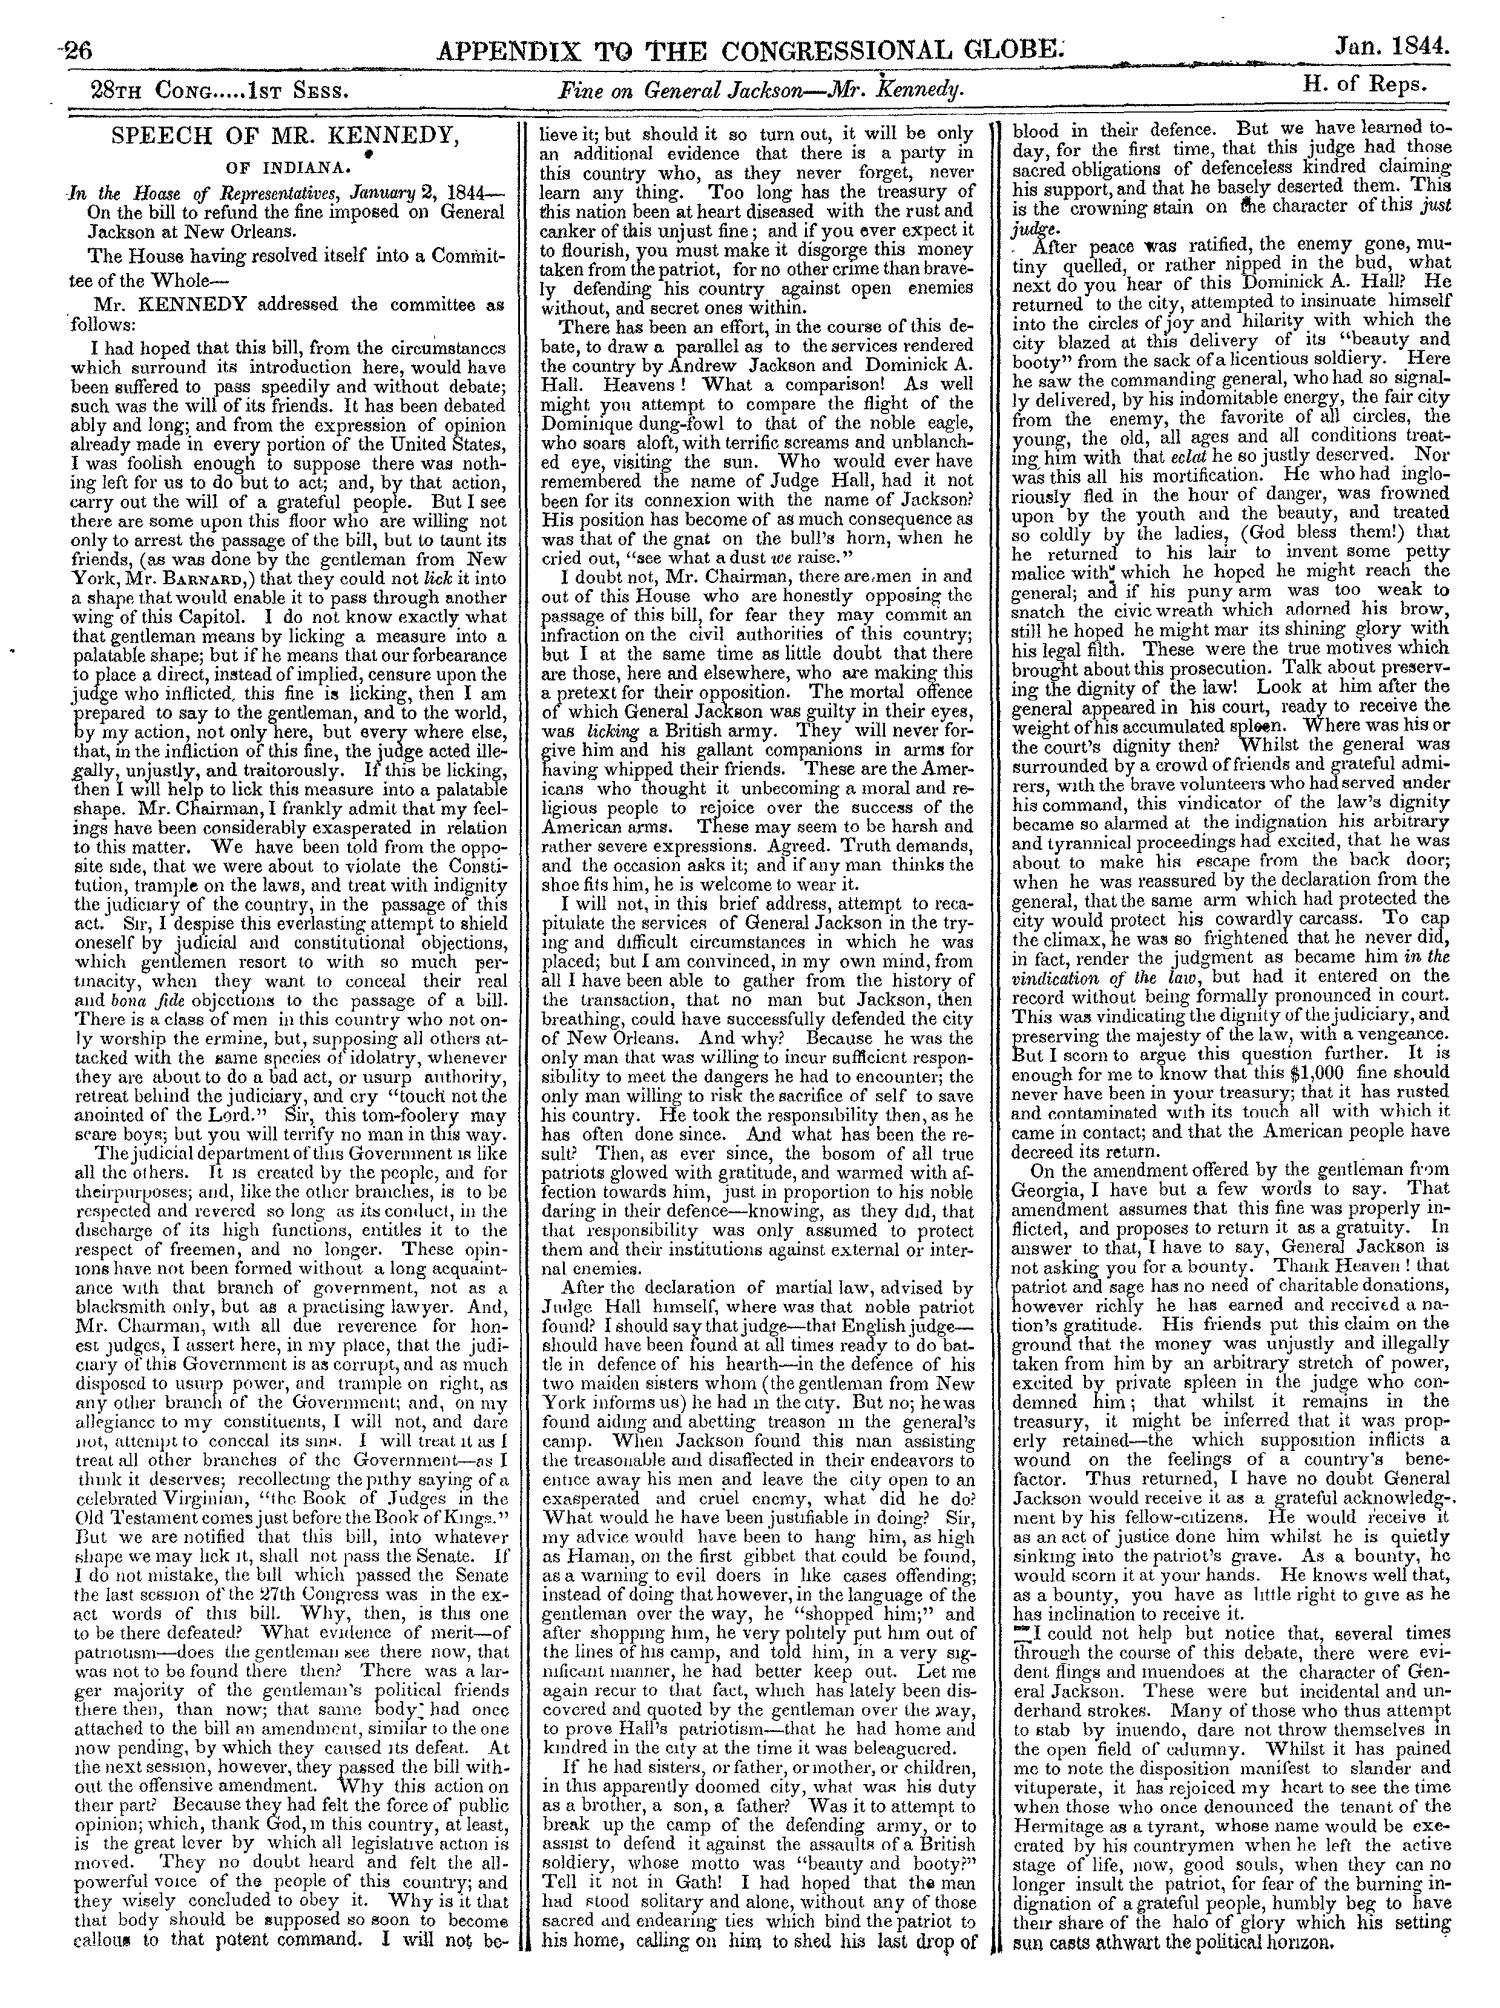 The Congressional Globe, Volume 13, Part 2: Twenty-Eighth Congress, First Session
                                                
                                                    26
                                                